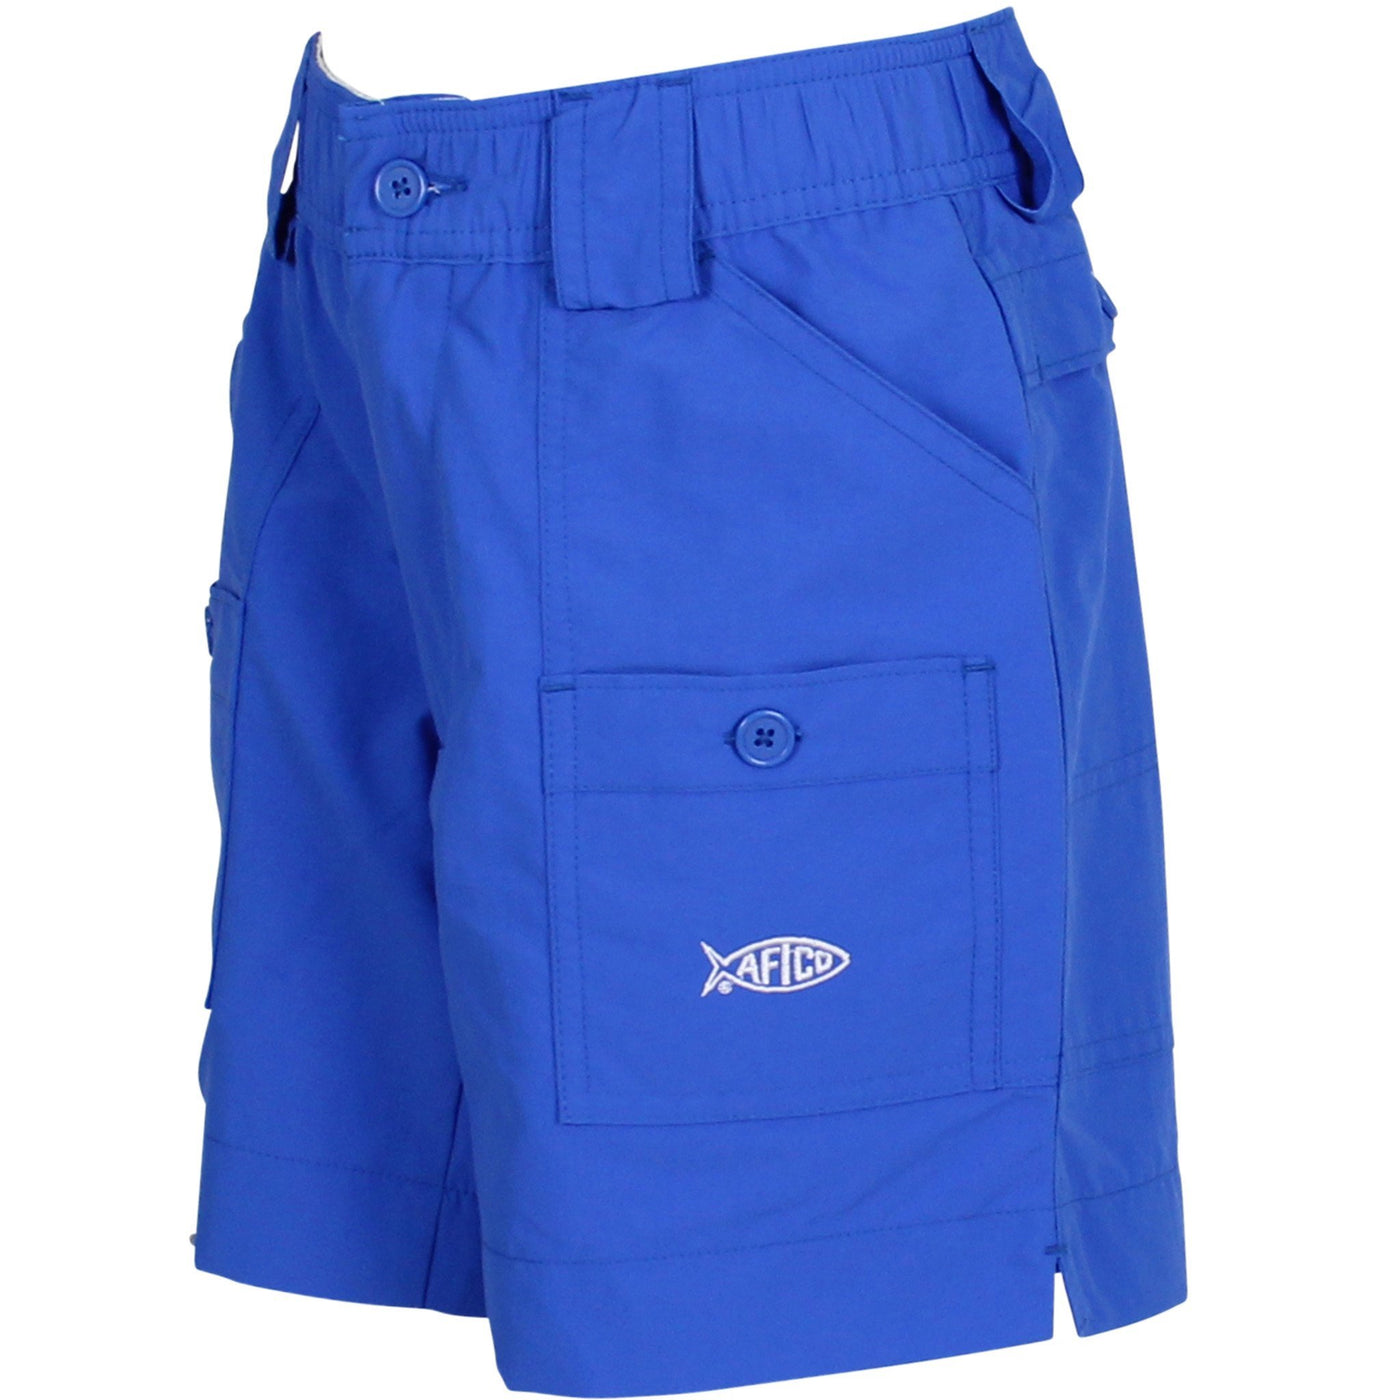 AFTCO Boys Original Fishing Short-CHILDRENS CLOTHING-Royal-20-Kevin's Fine Outdoor Gear & Apparel